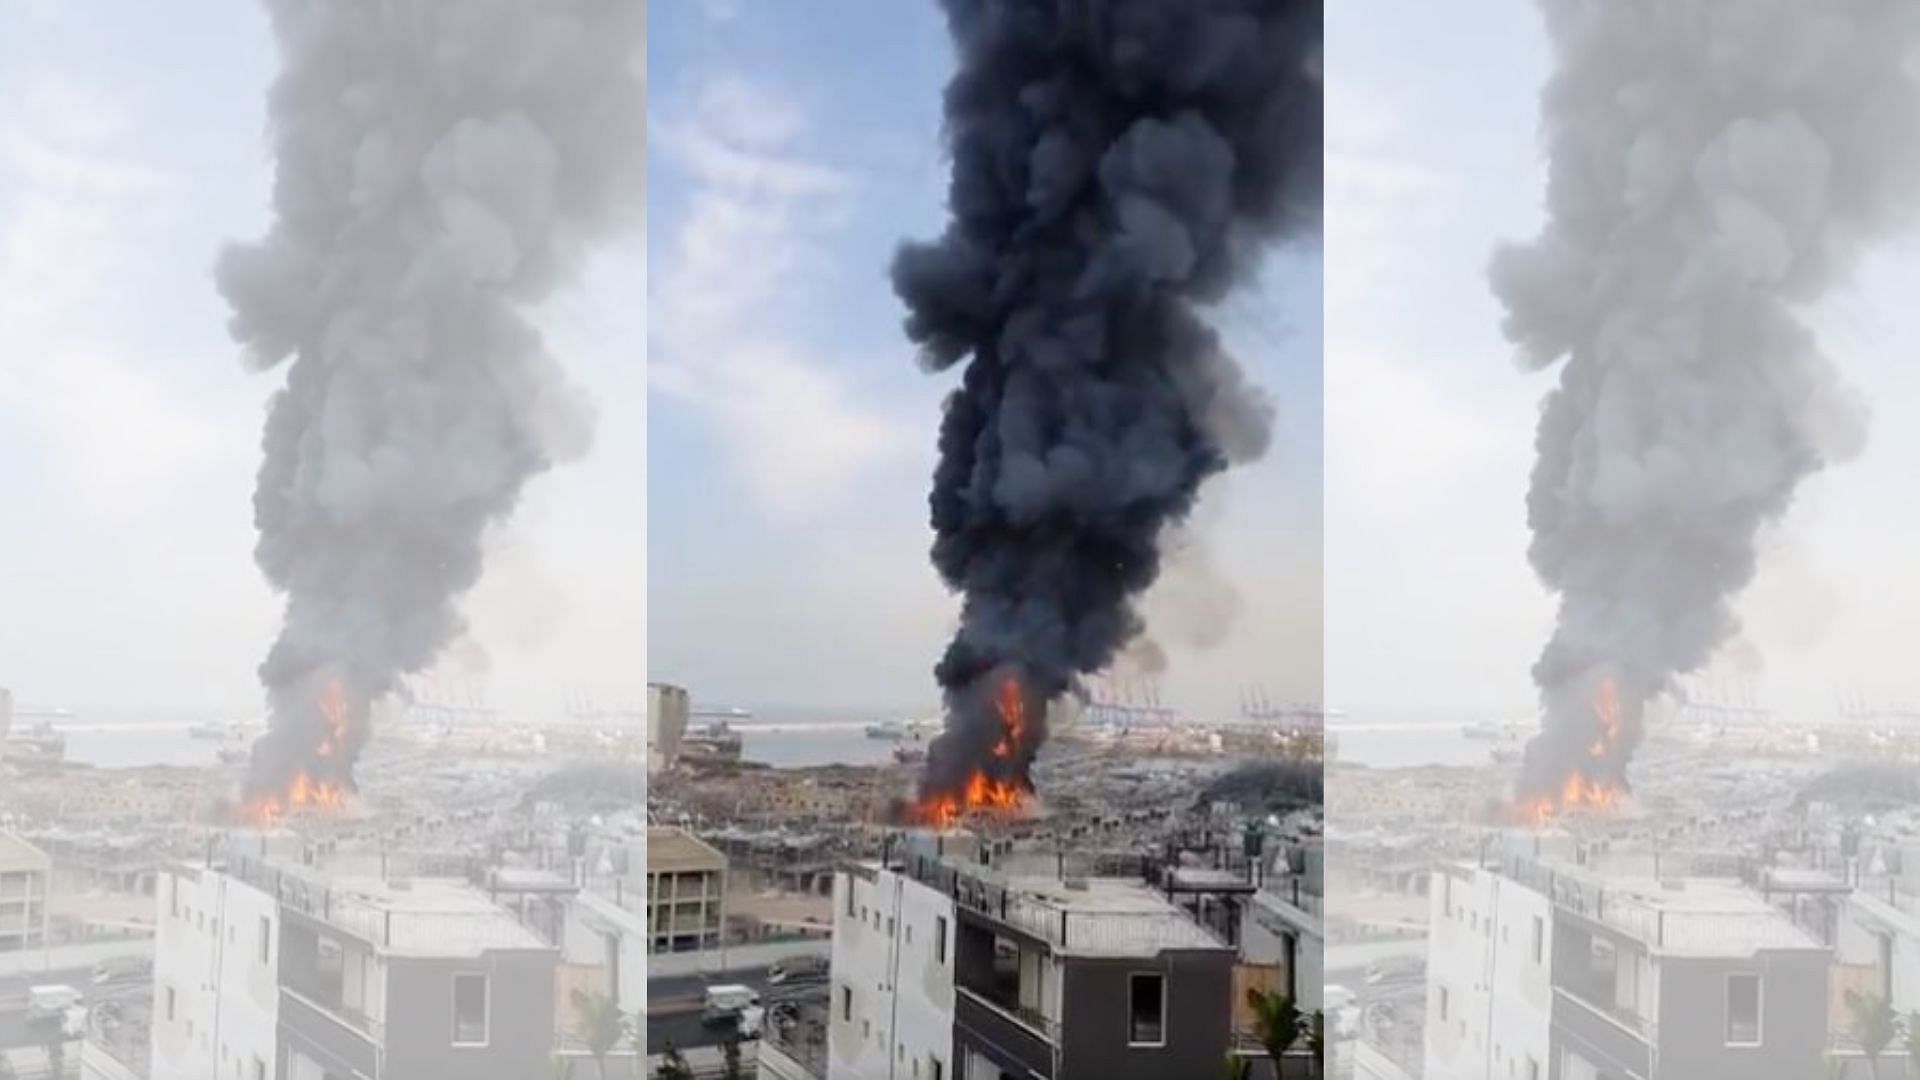 A fire sending up a large column of black smoke into the sky was seen at the Beirut port on Thursday, 10 September.